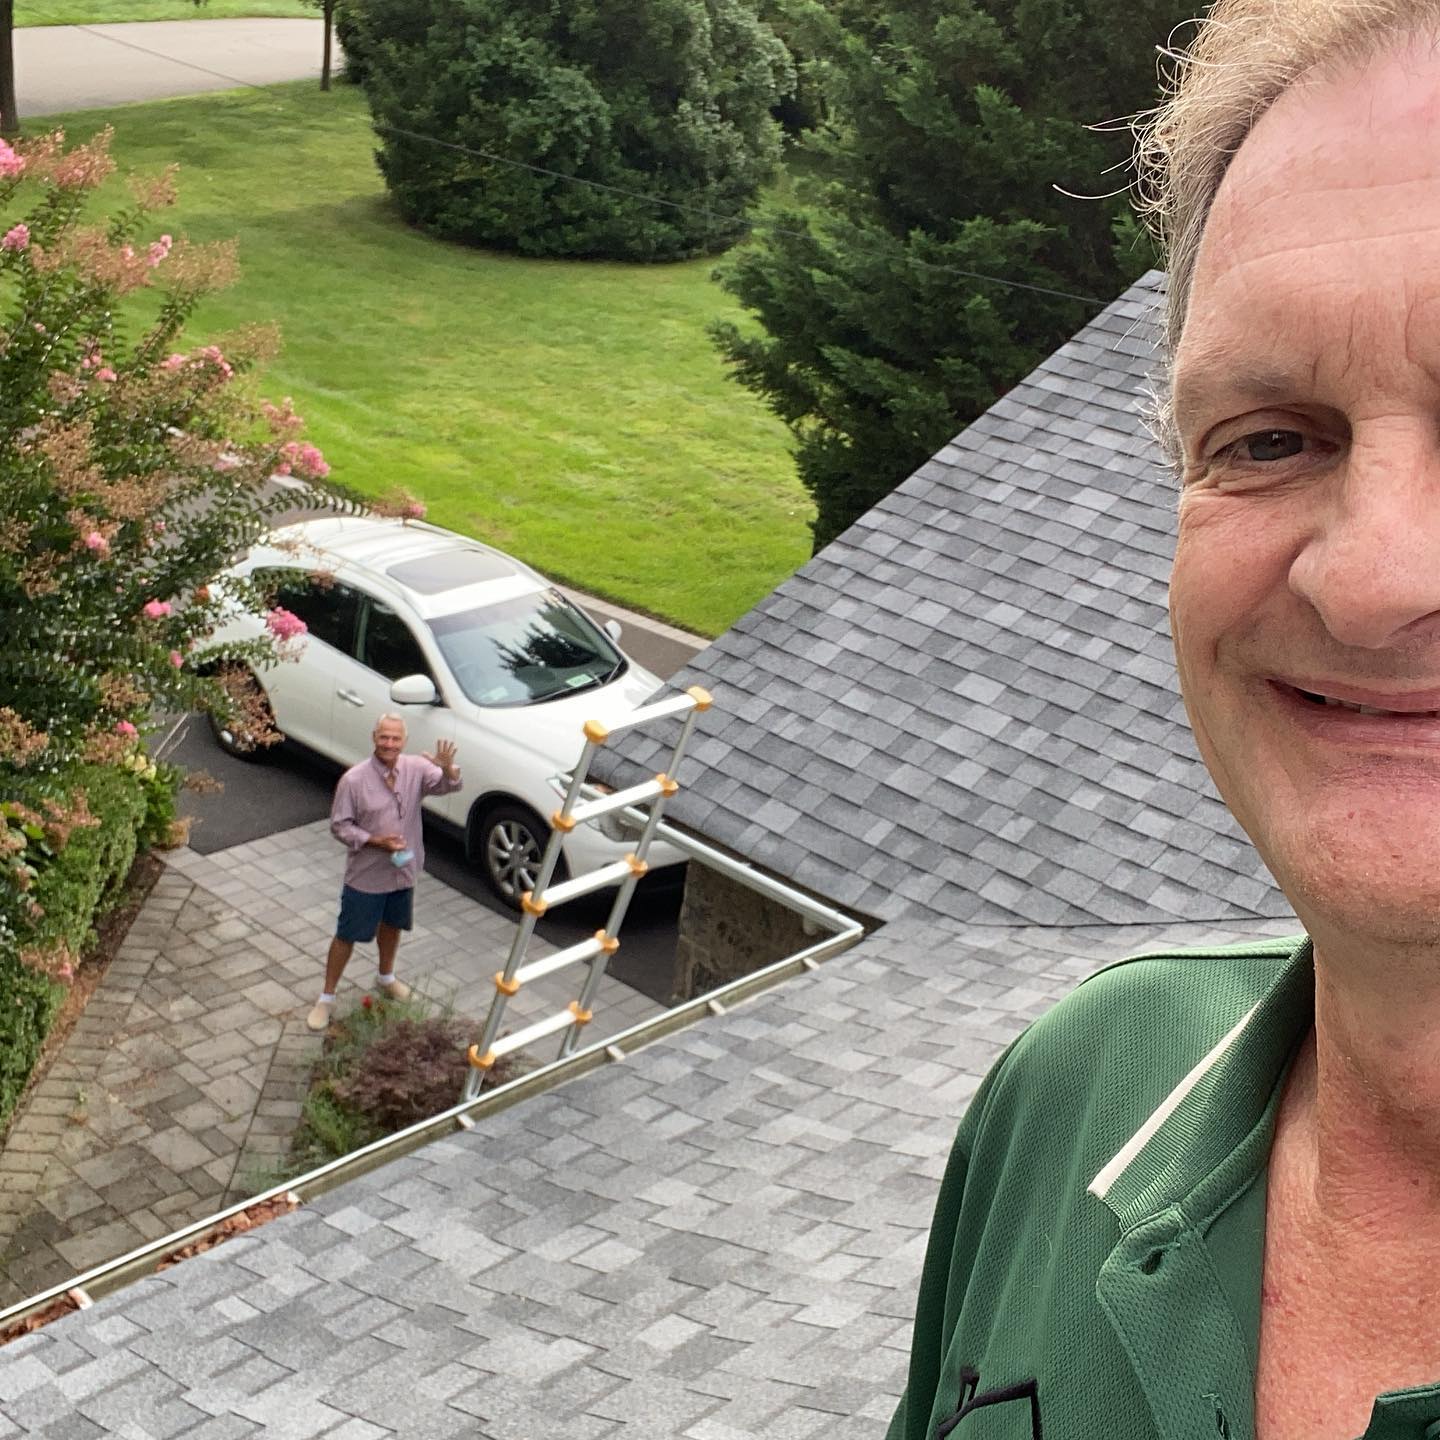 Selfie of John inspecting a new rood with a real estate agent on the ground waving